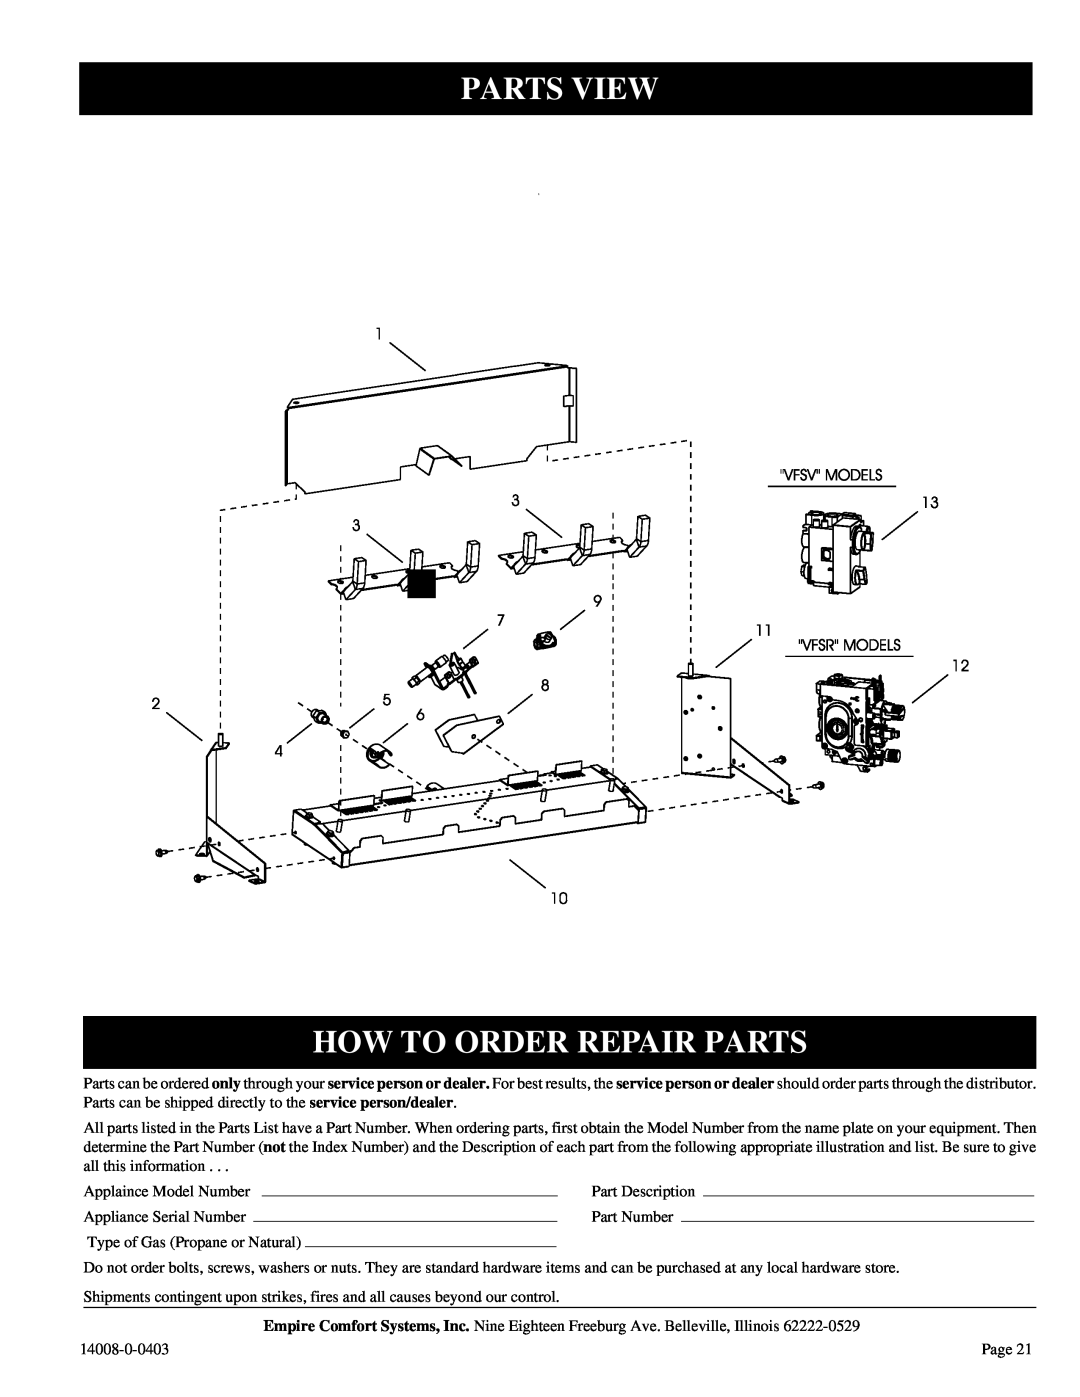 Empire Comfort Systems VFSR-16-3, VFSR-18-3 installation instructions Parts View How To Order Repair Parts 